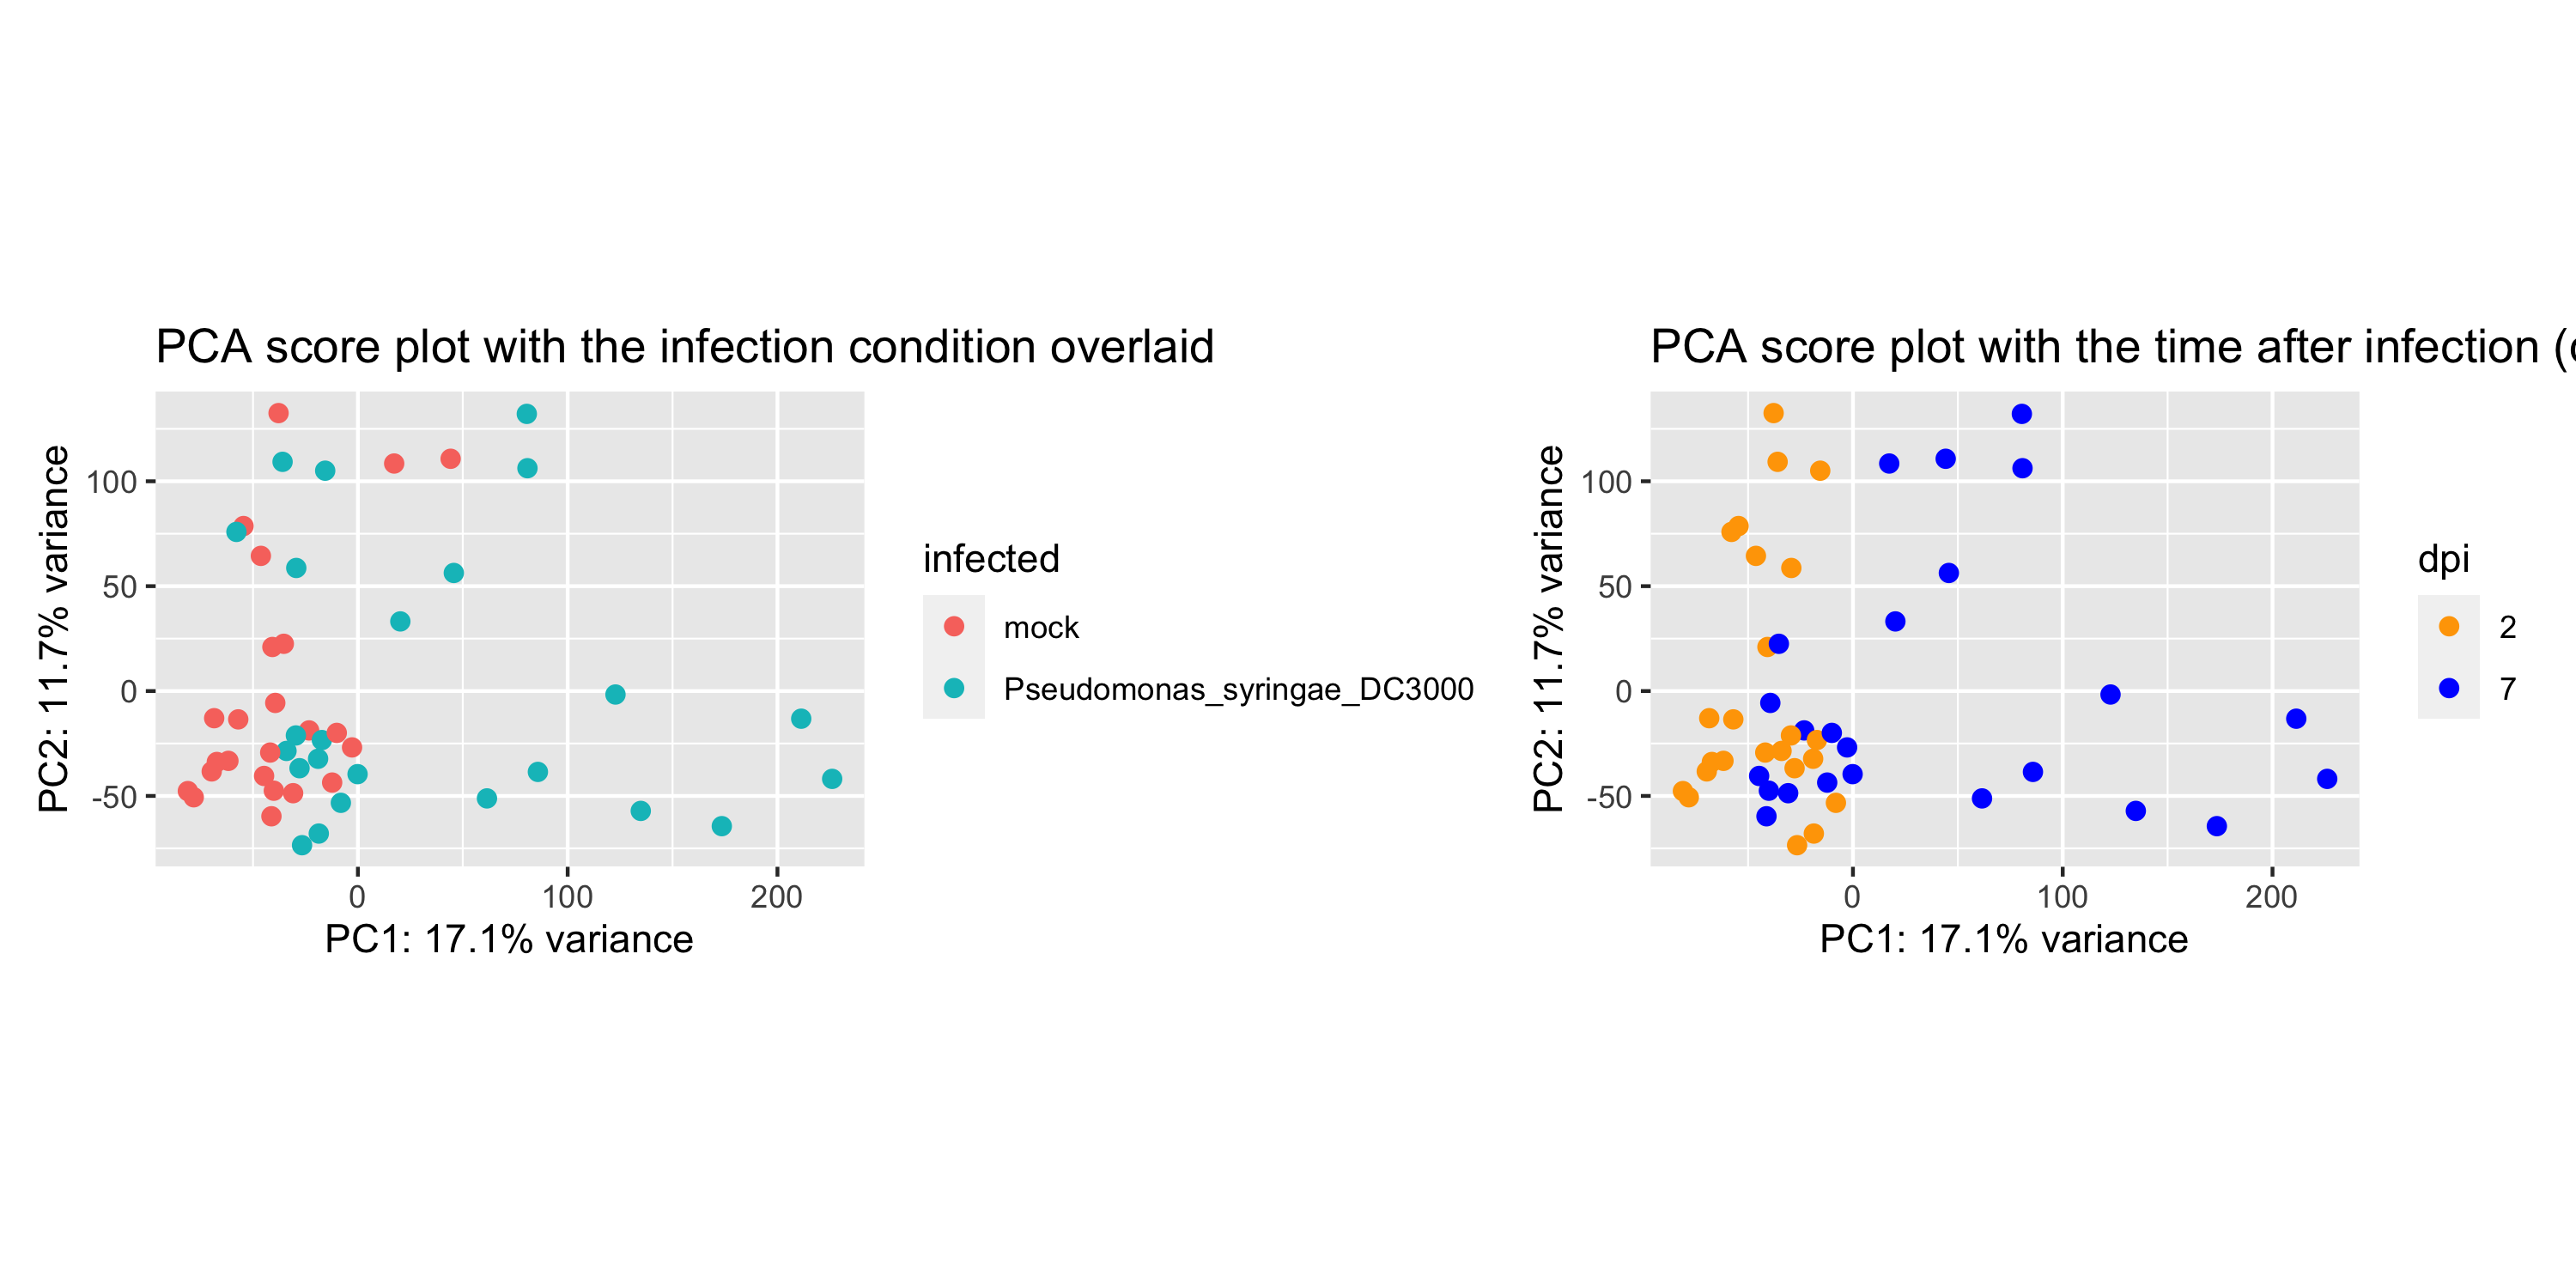 comparison of infection and dpi score plots